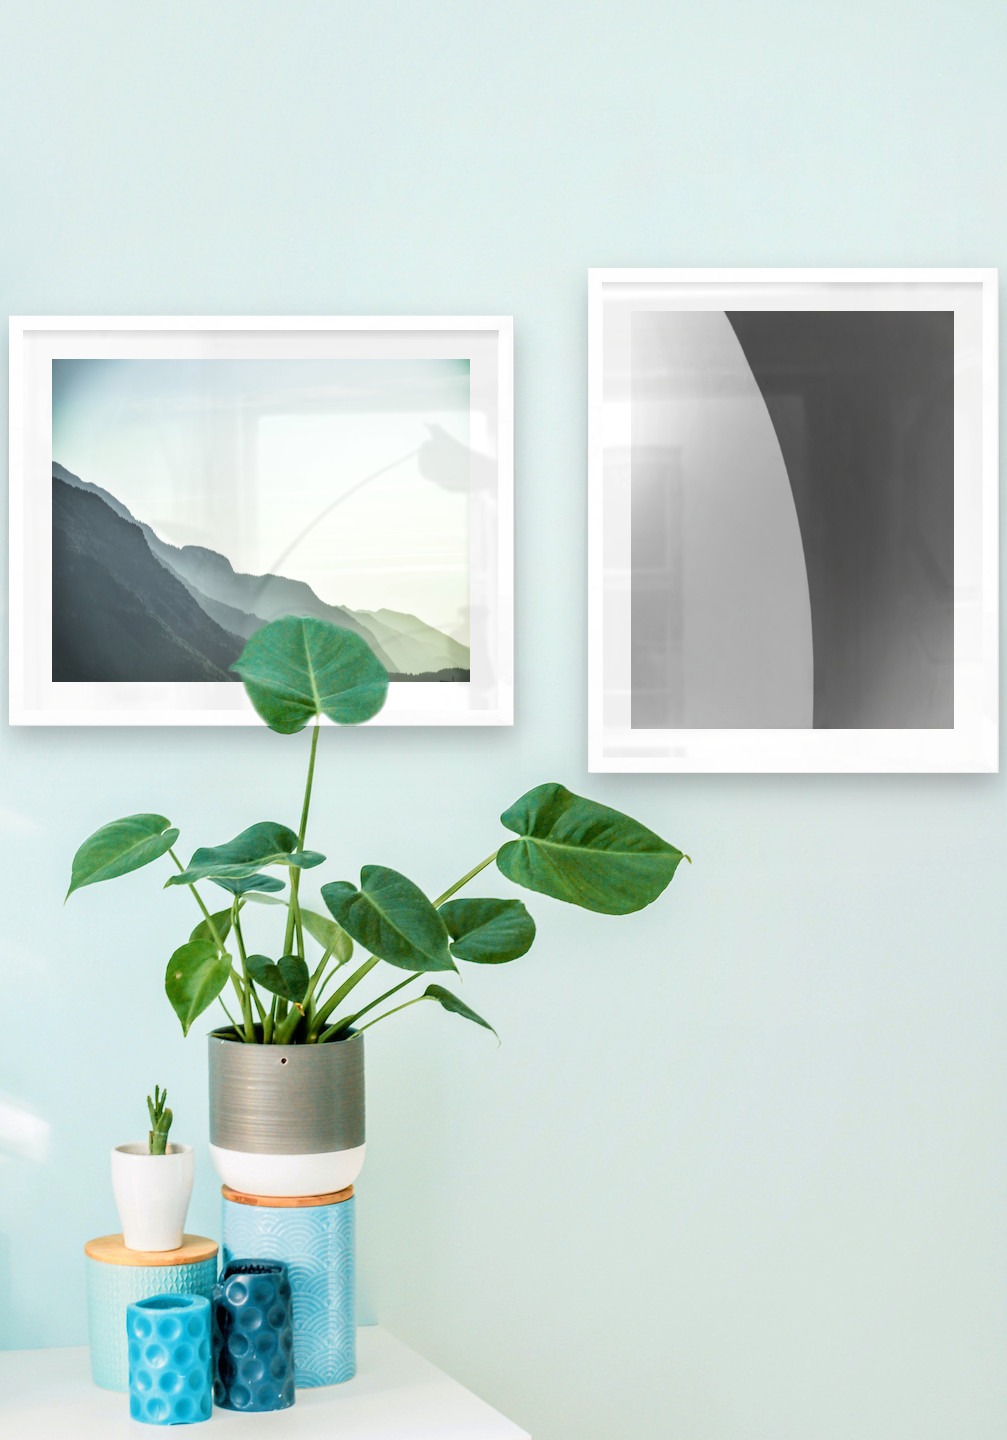 Gallery wall with picture frames in white in sizes 40x50 with prints "Foggy mountain" and "Line"